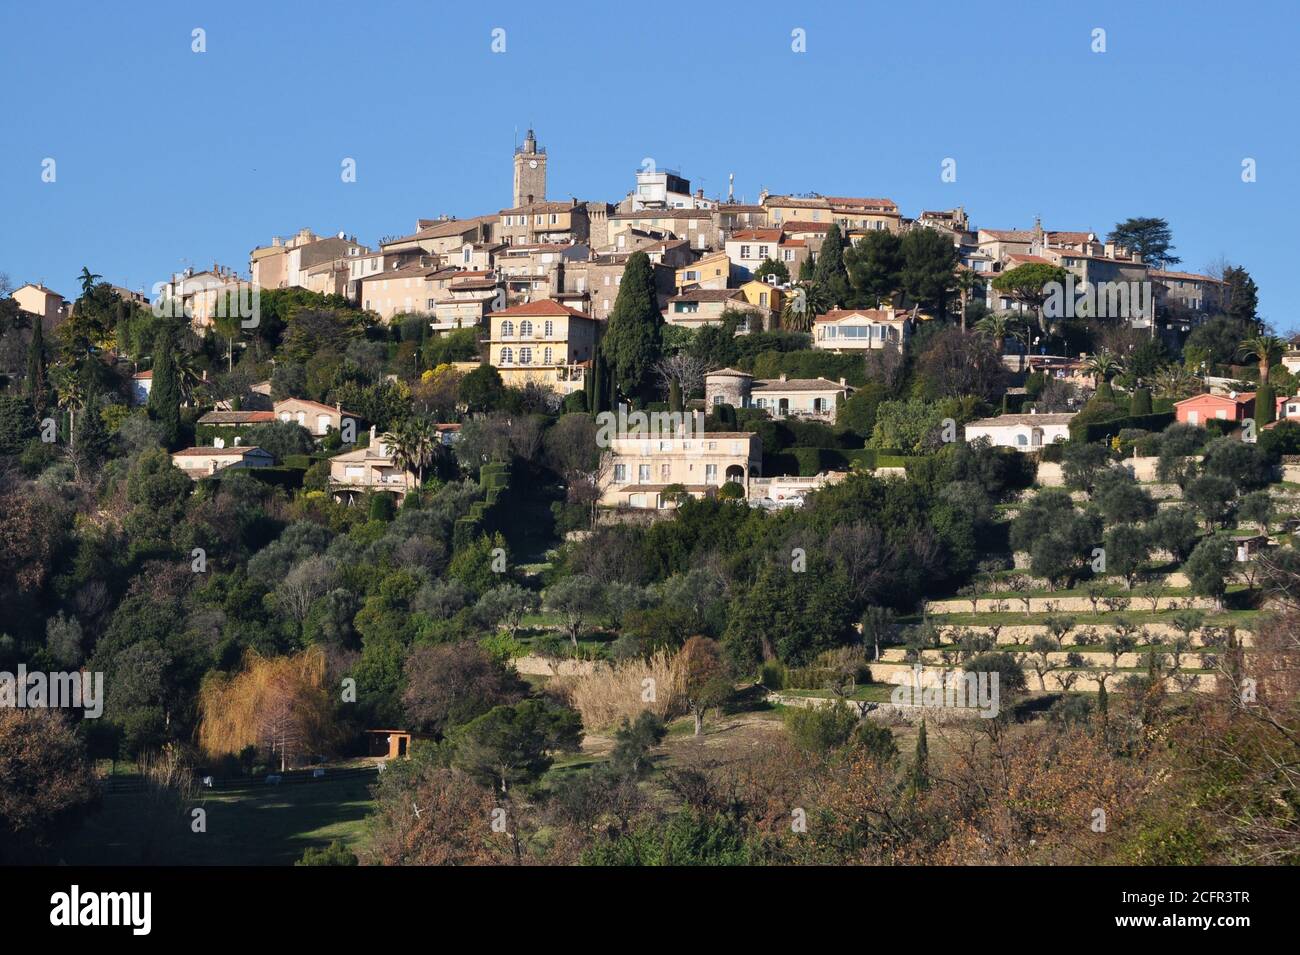 France, french riviera, Mougins, this beautiful perched medieval village stands between the pines and olive trees, Pablo Picasso live there 15 years. Stock Photo